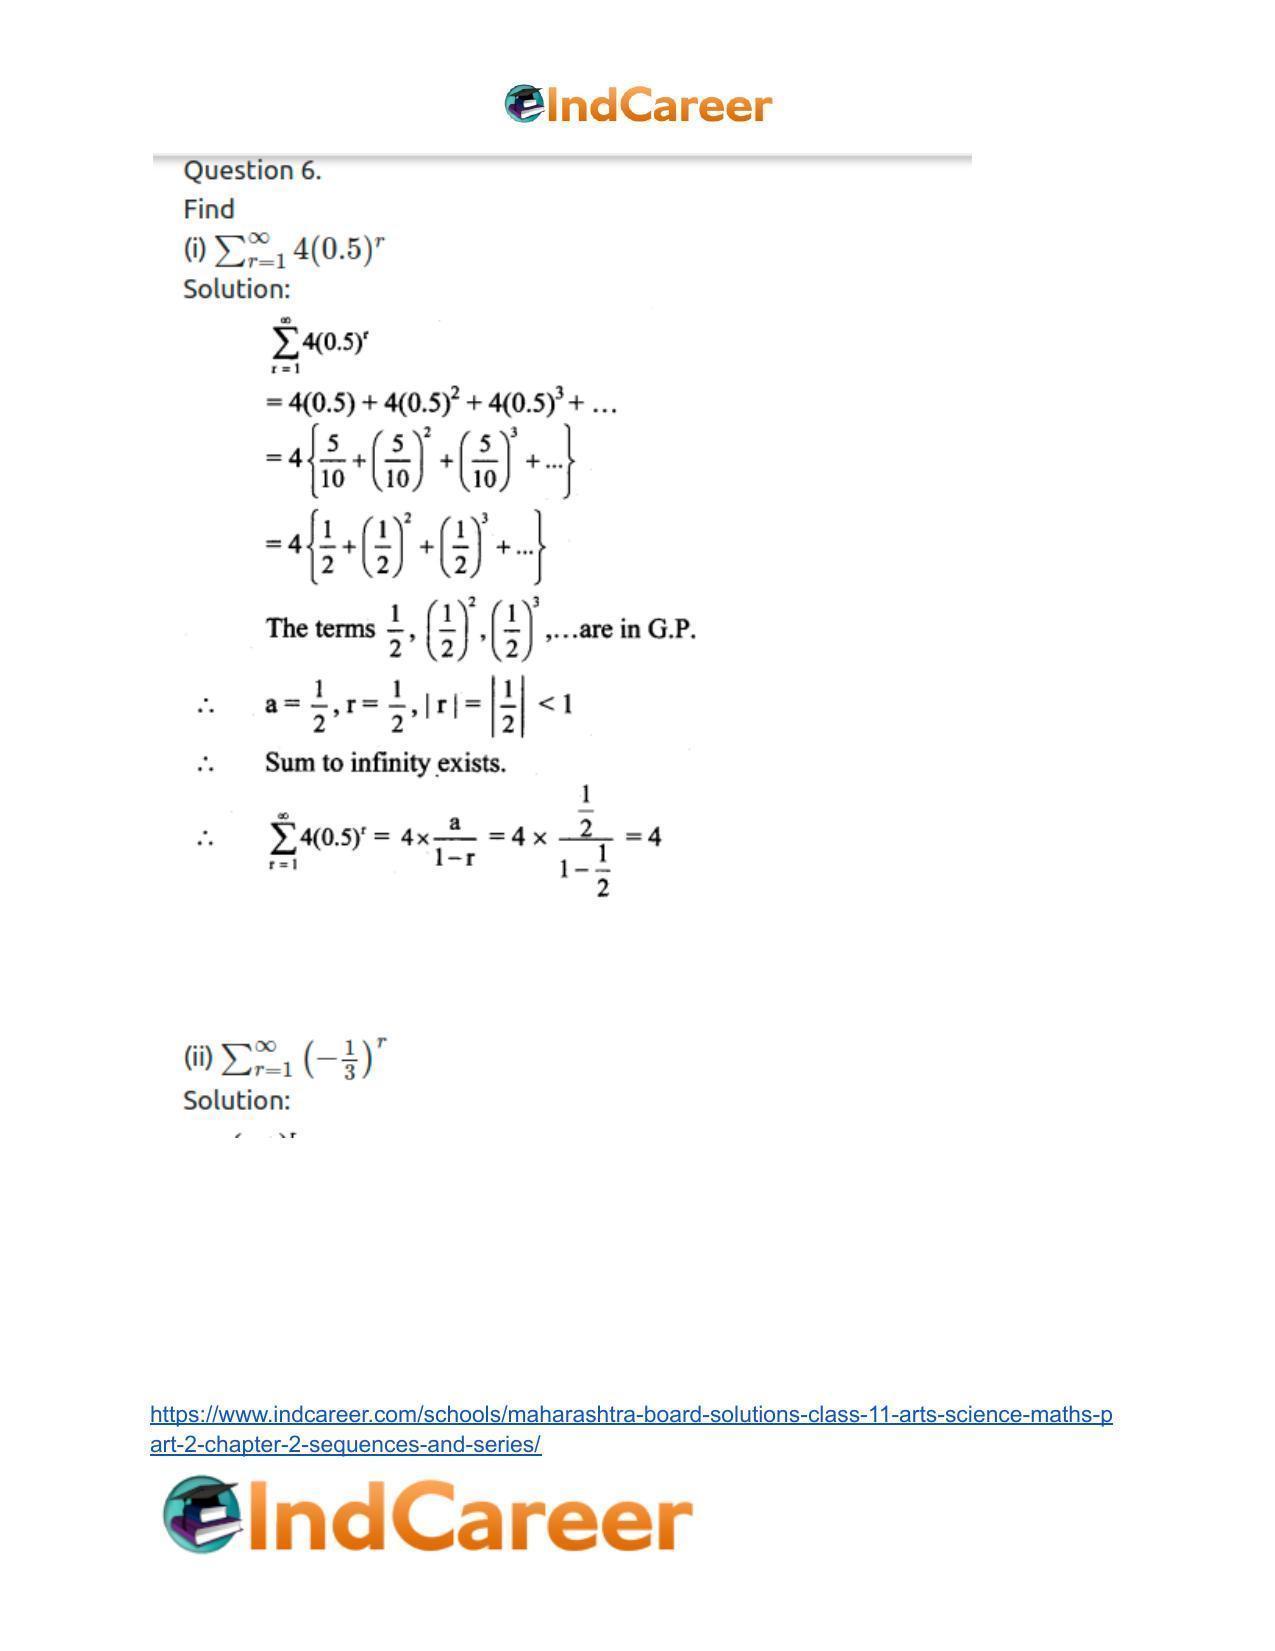 Maharashtra Board Solutions Class 11-Arts & Science Maths (Part 2): Chapter 2- Sequences and Series - Page 45